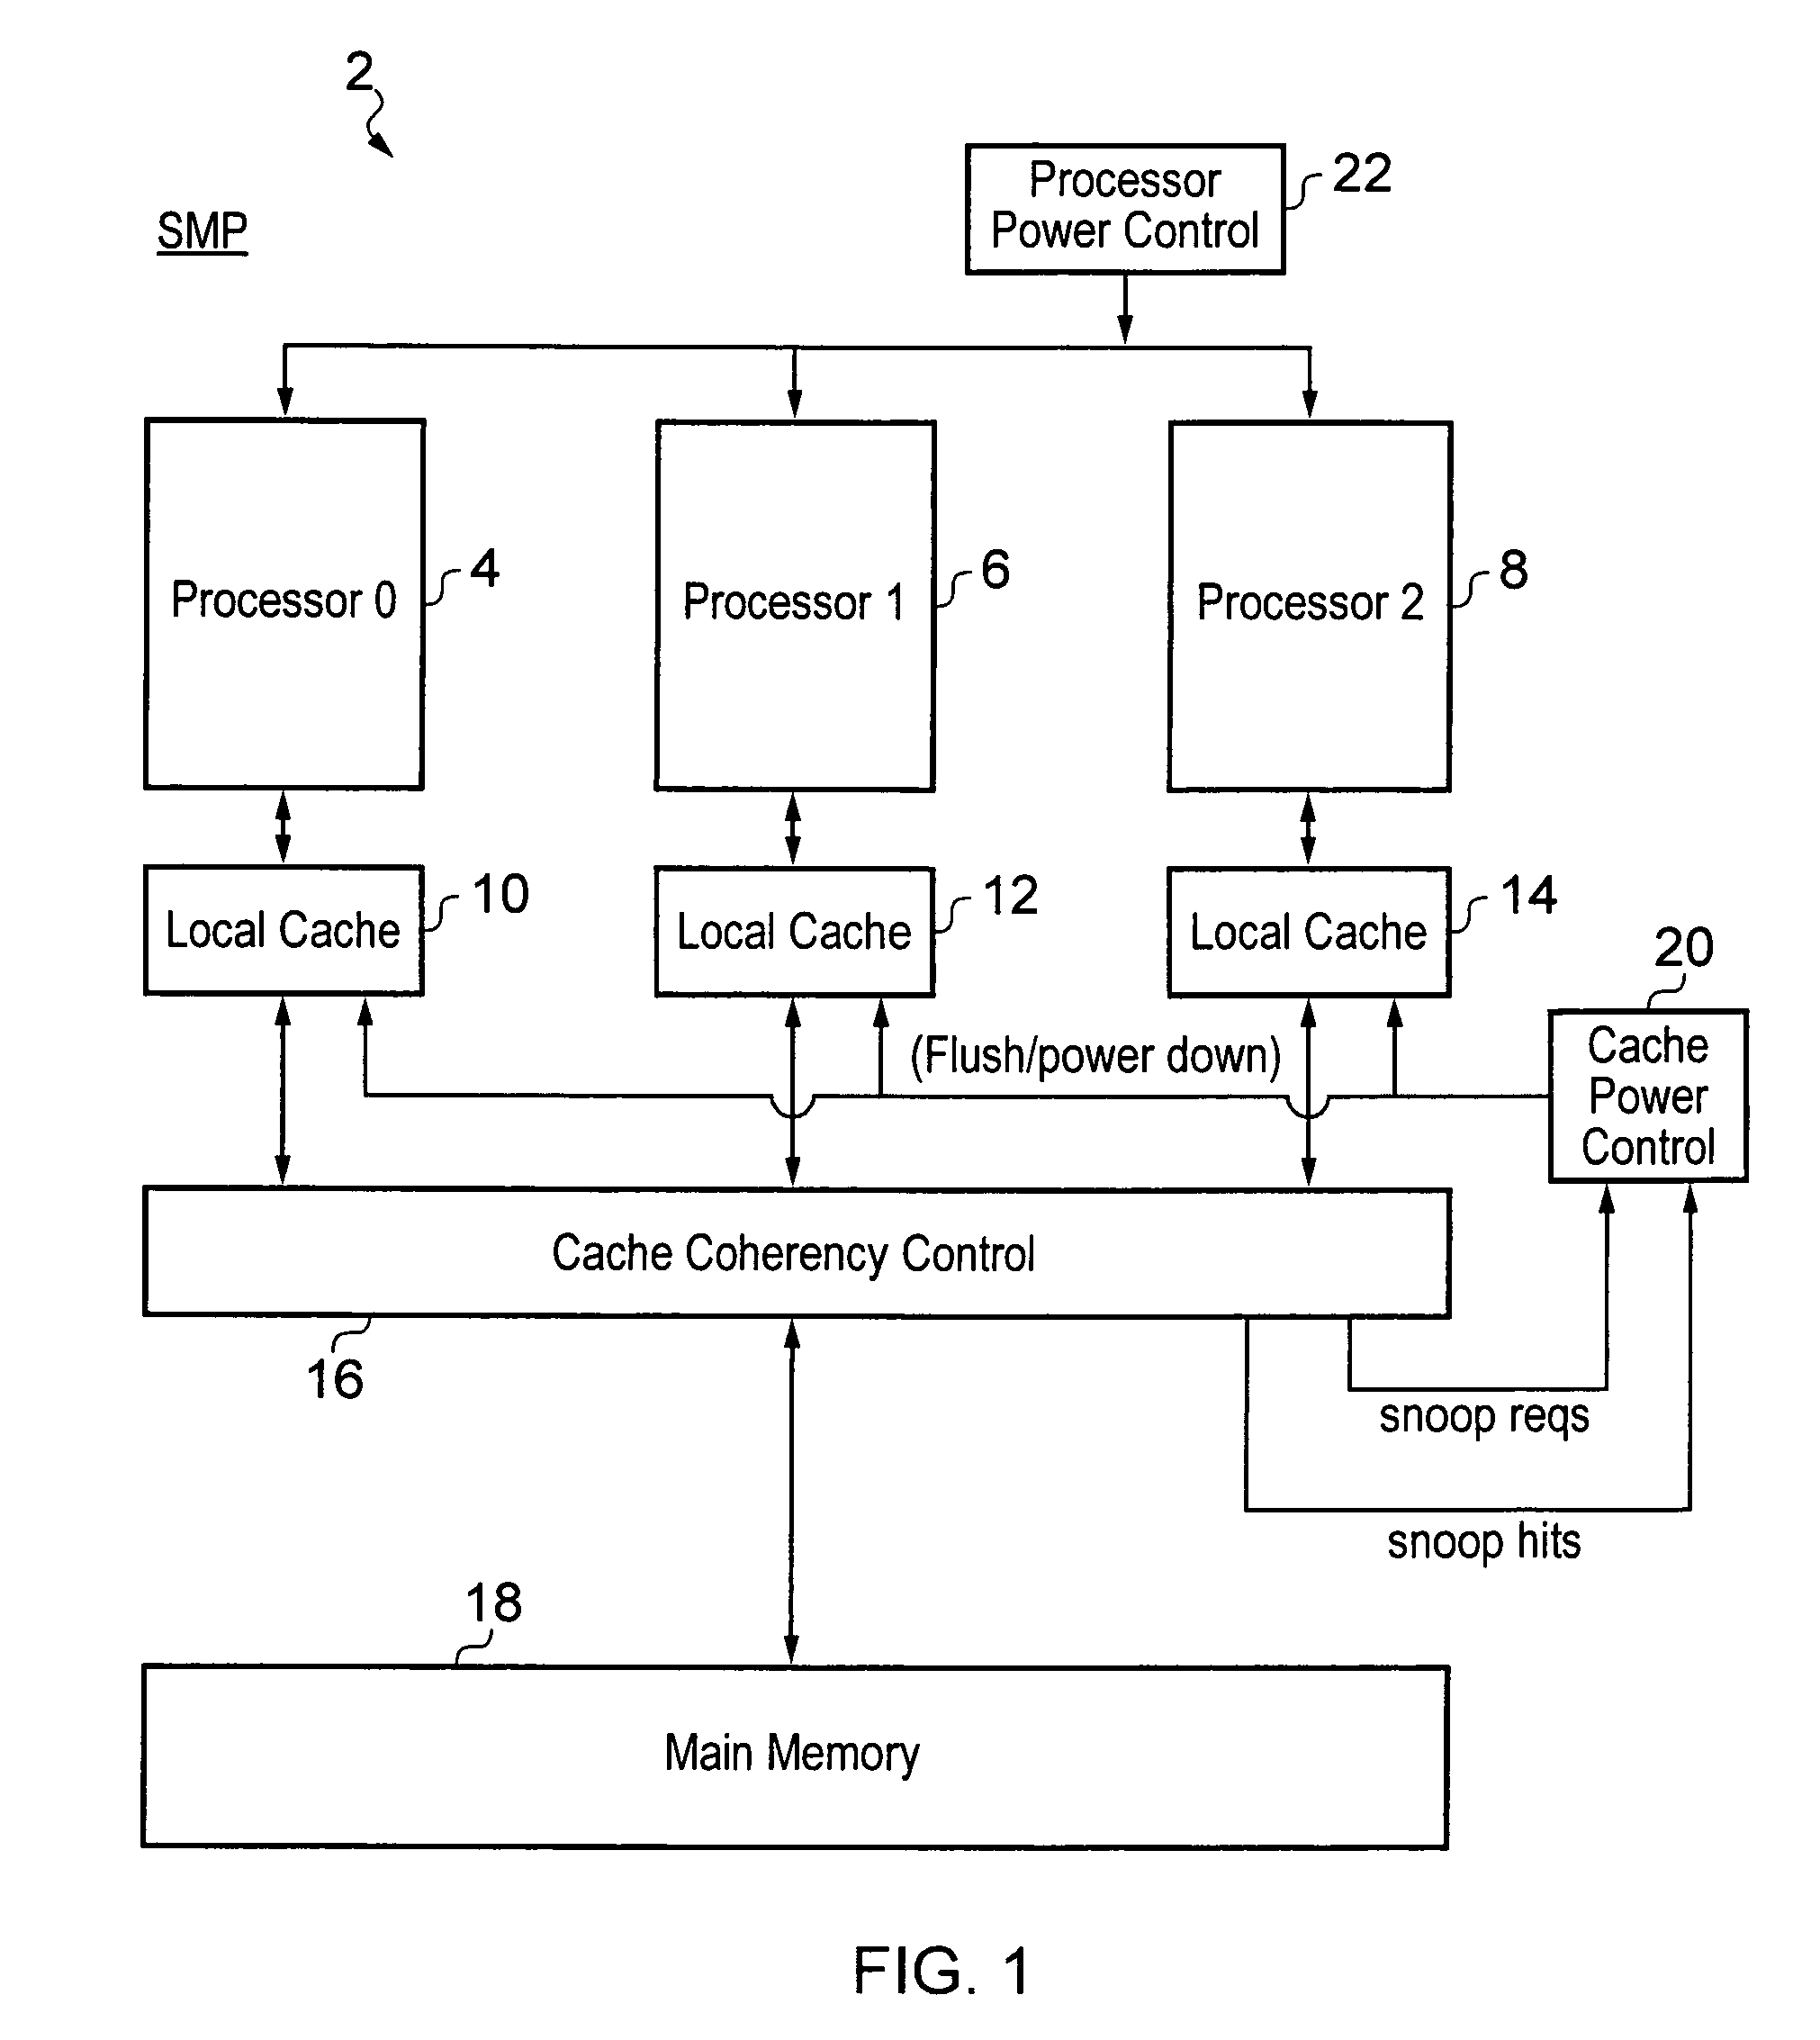 Local cache power control within a multiprocessor system